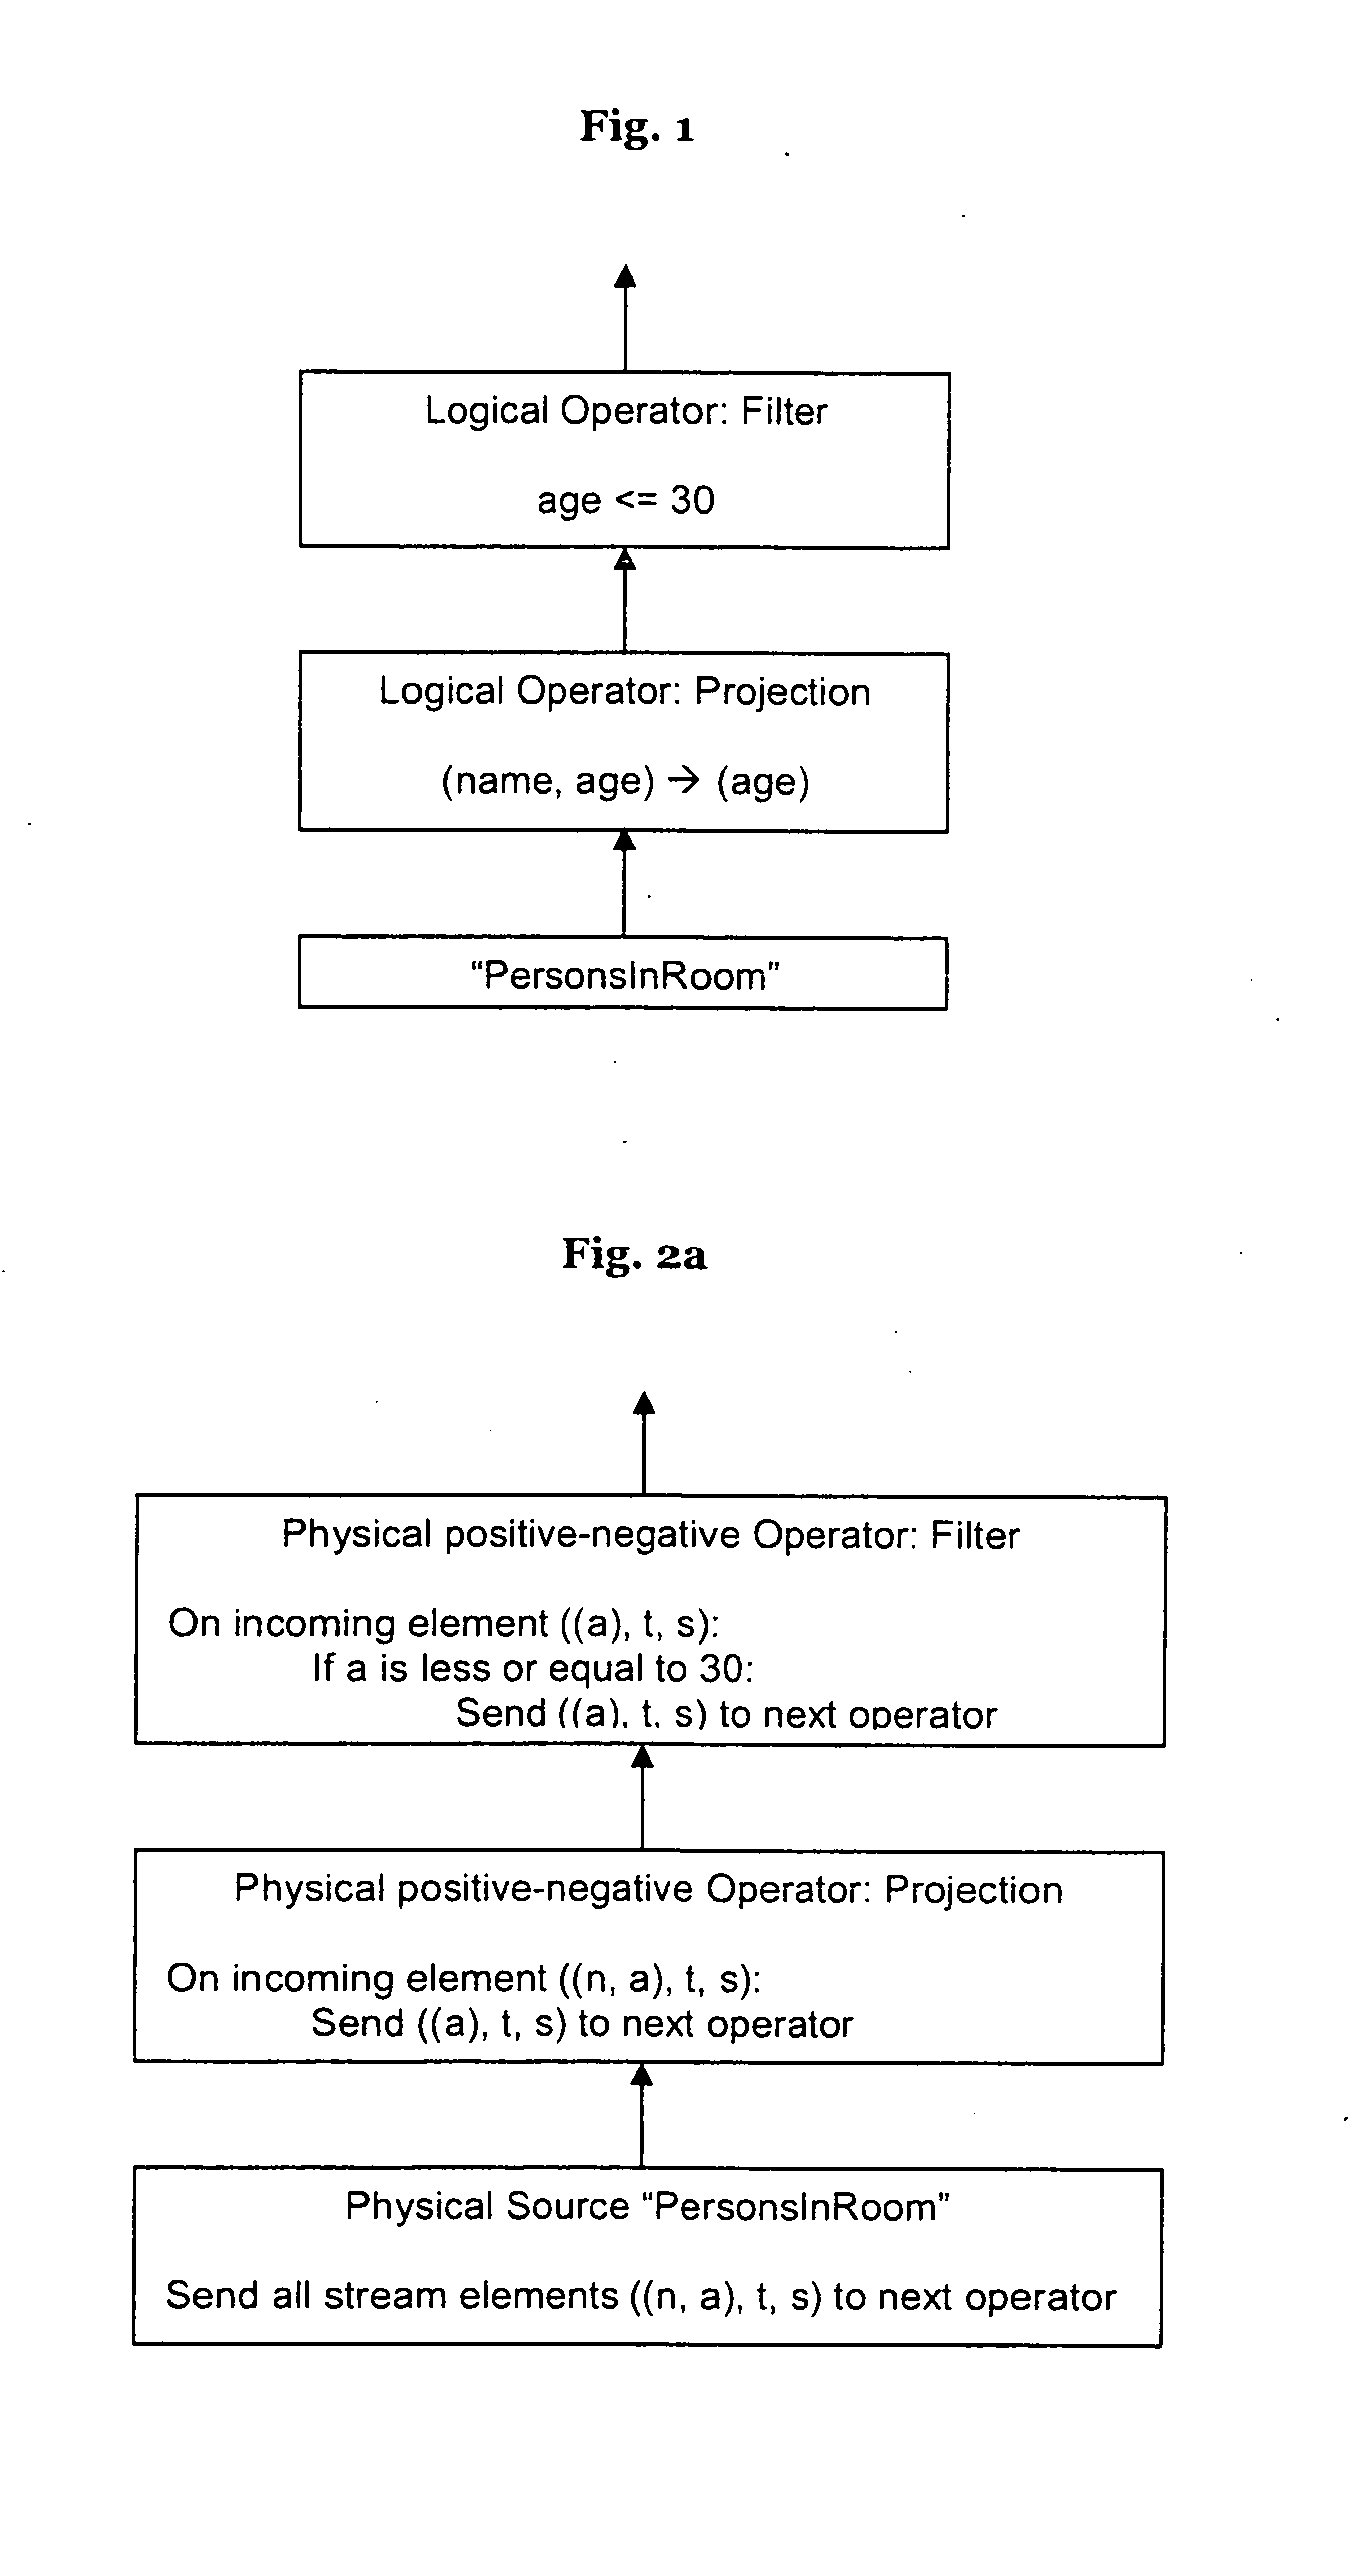 CEP engine and method for processing CEP queries